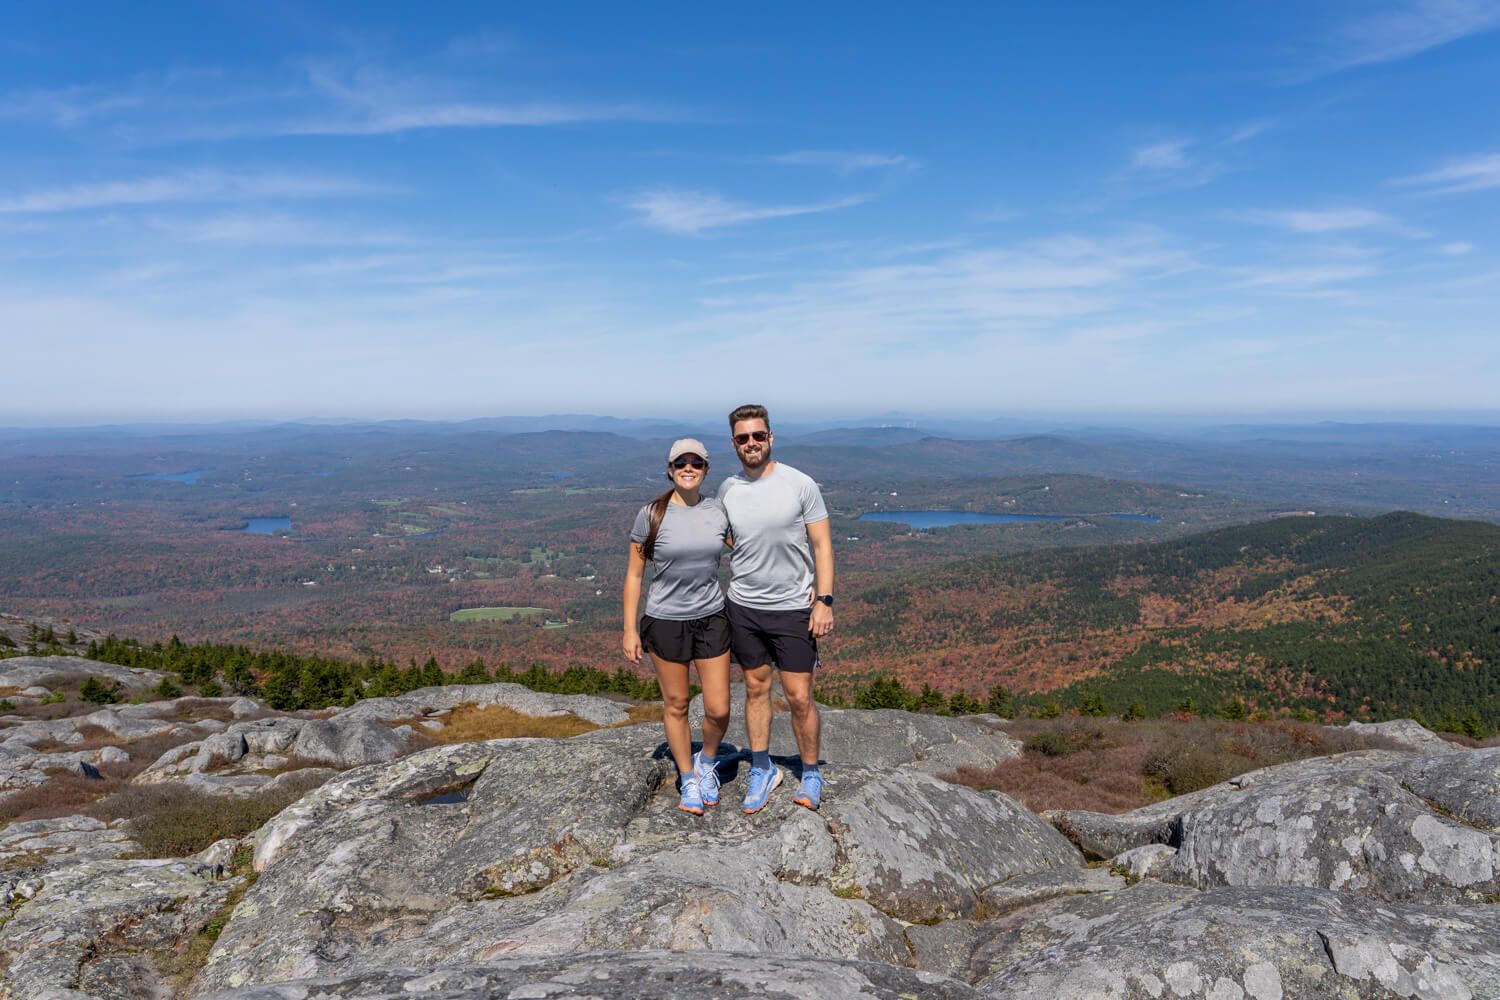 Two hikers stood together for a photo at the summit of a rocky mountain with far reaching views behind